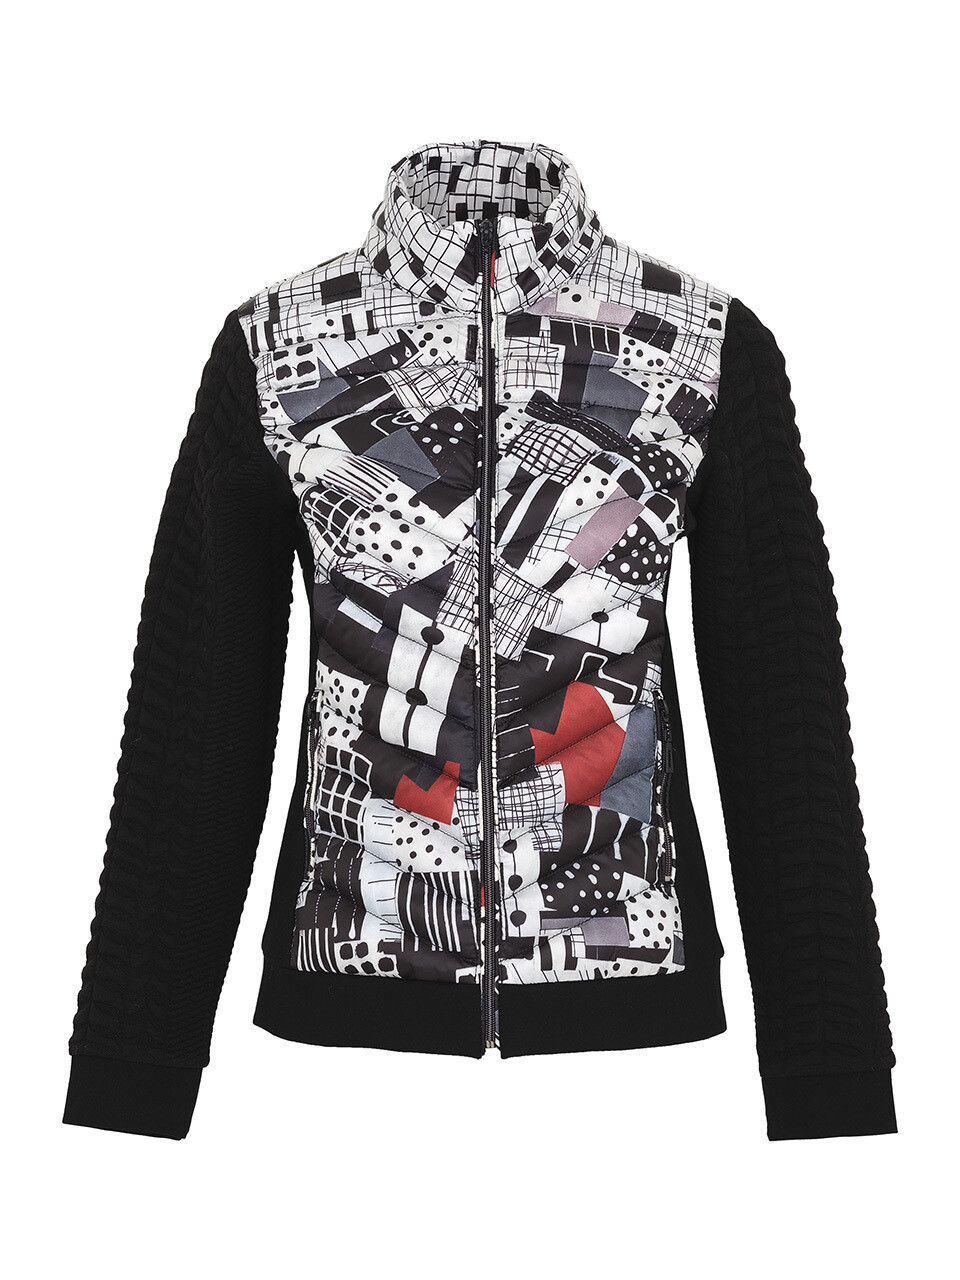 Simply Art Dolcezza: Vivacity Abstract Art Hoodie Jacket